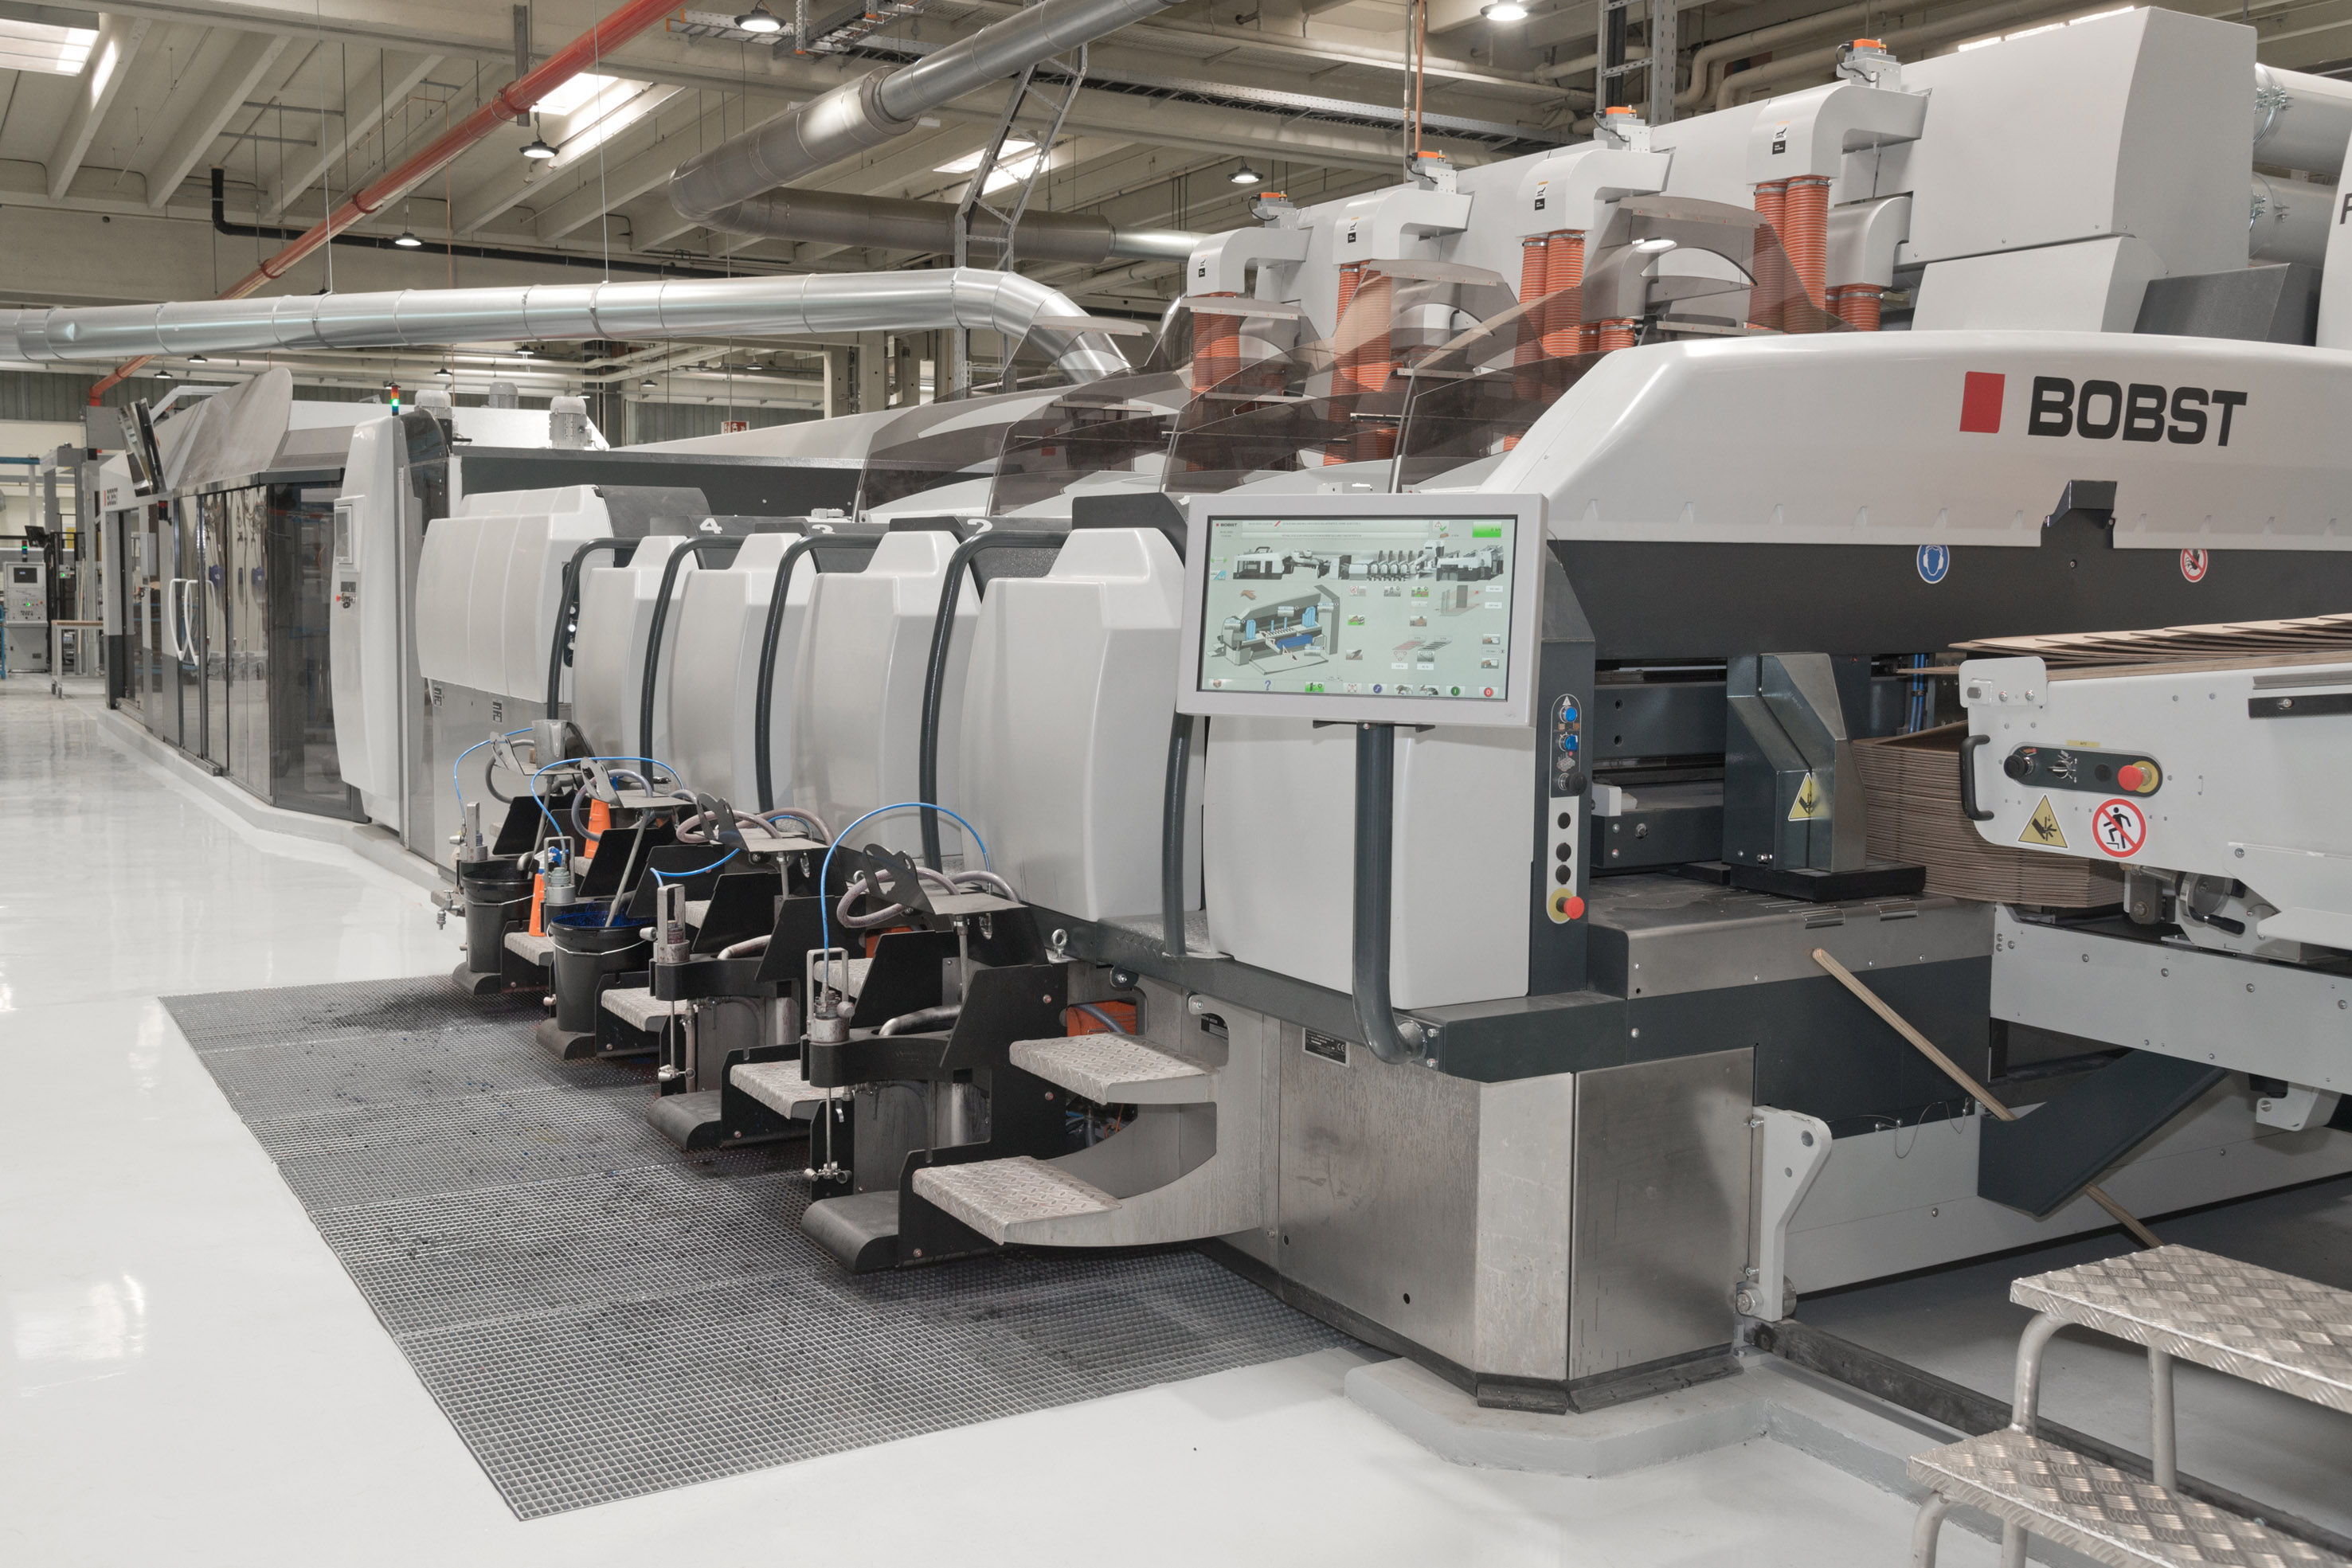 With the fully automatic FFG 8.20 BS EXPERTLINE inline machine, Wellkistenfabrik Fritz Peters now produces many jobs in just one step that once took two work stages. They can now profitably process orders they once had to pass up.